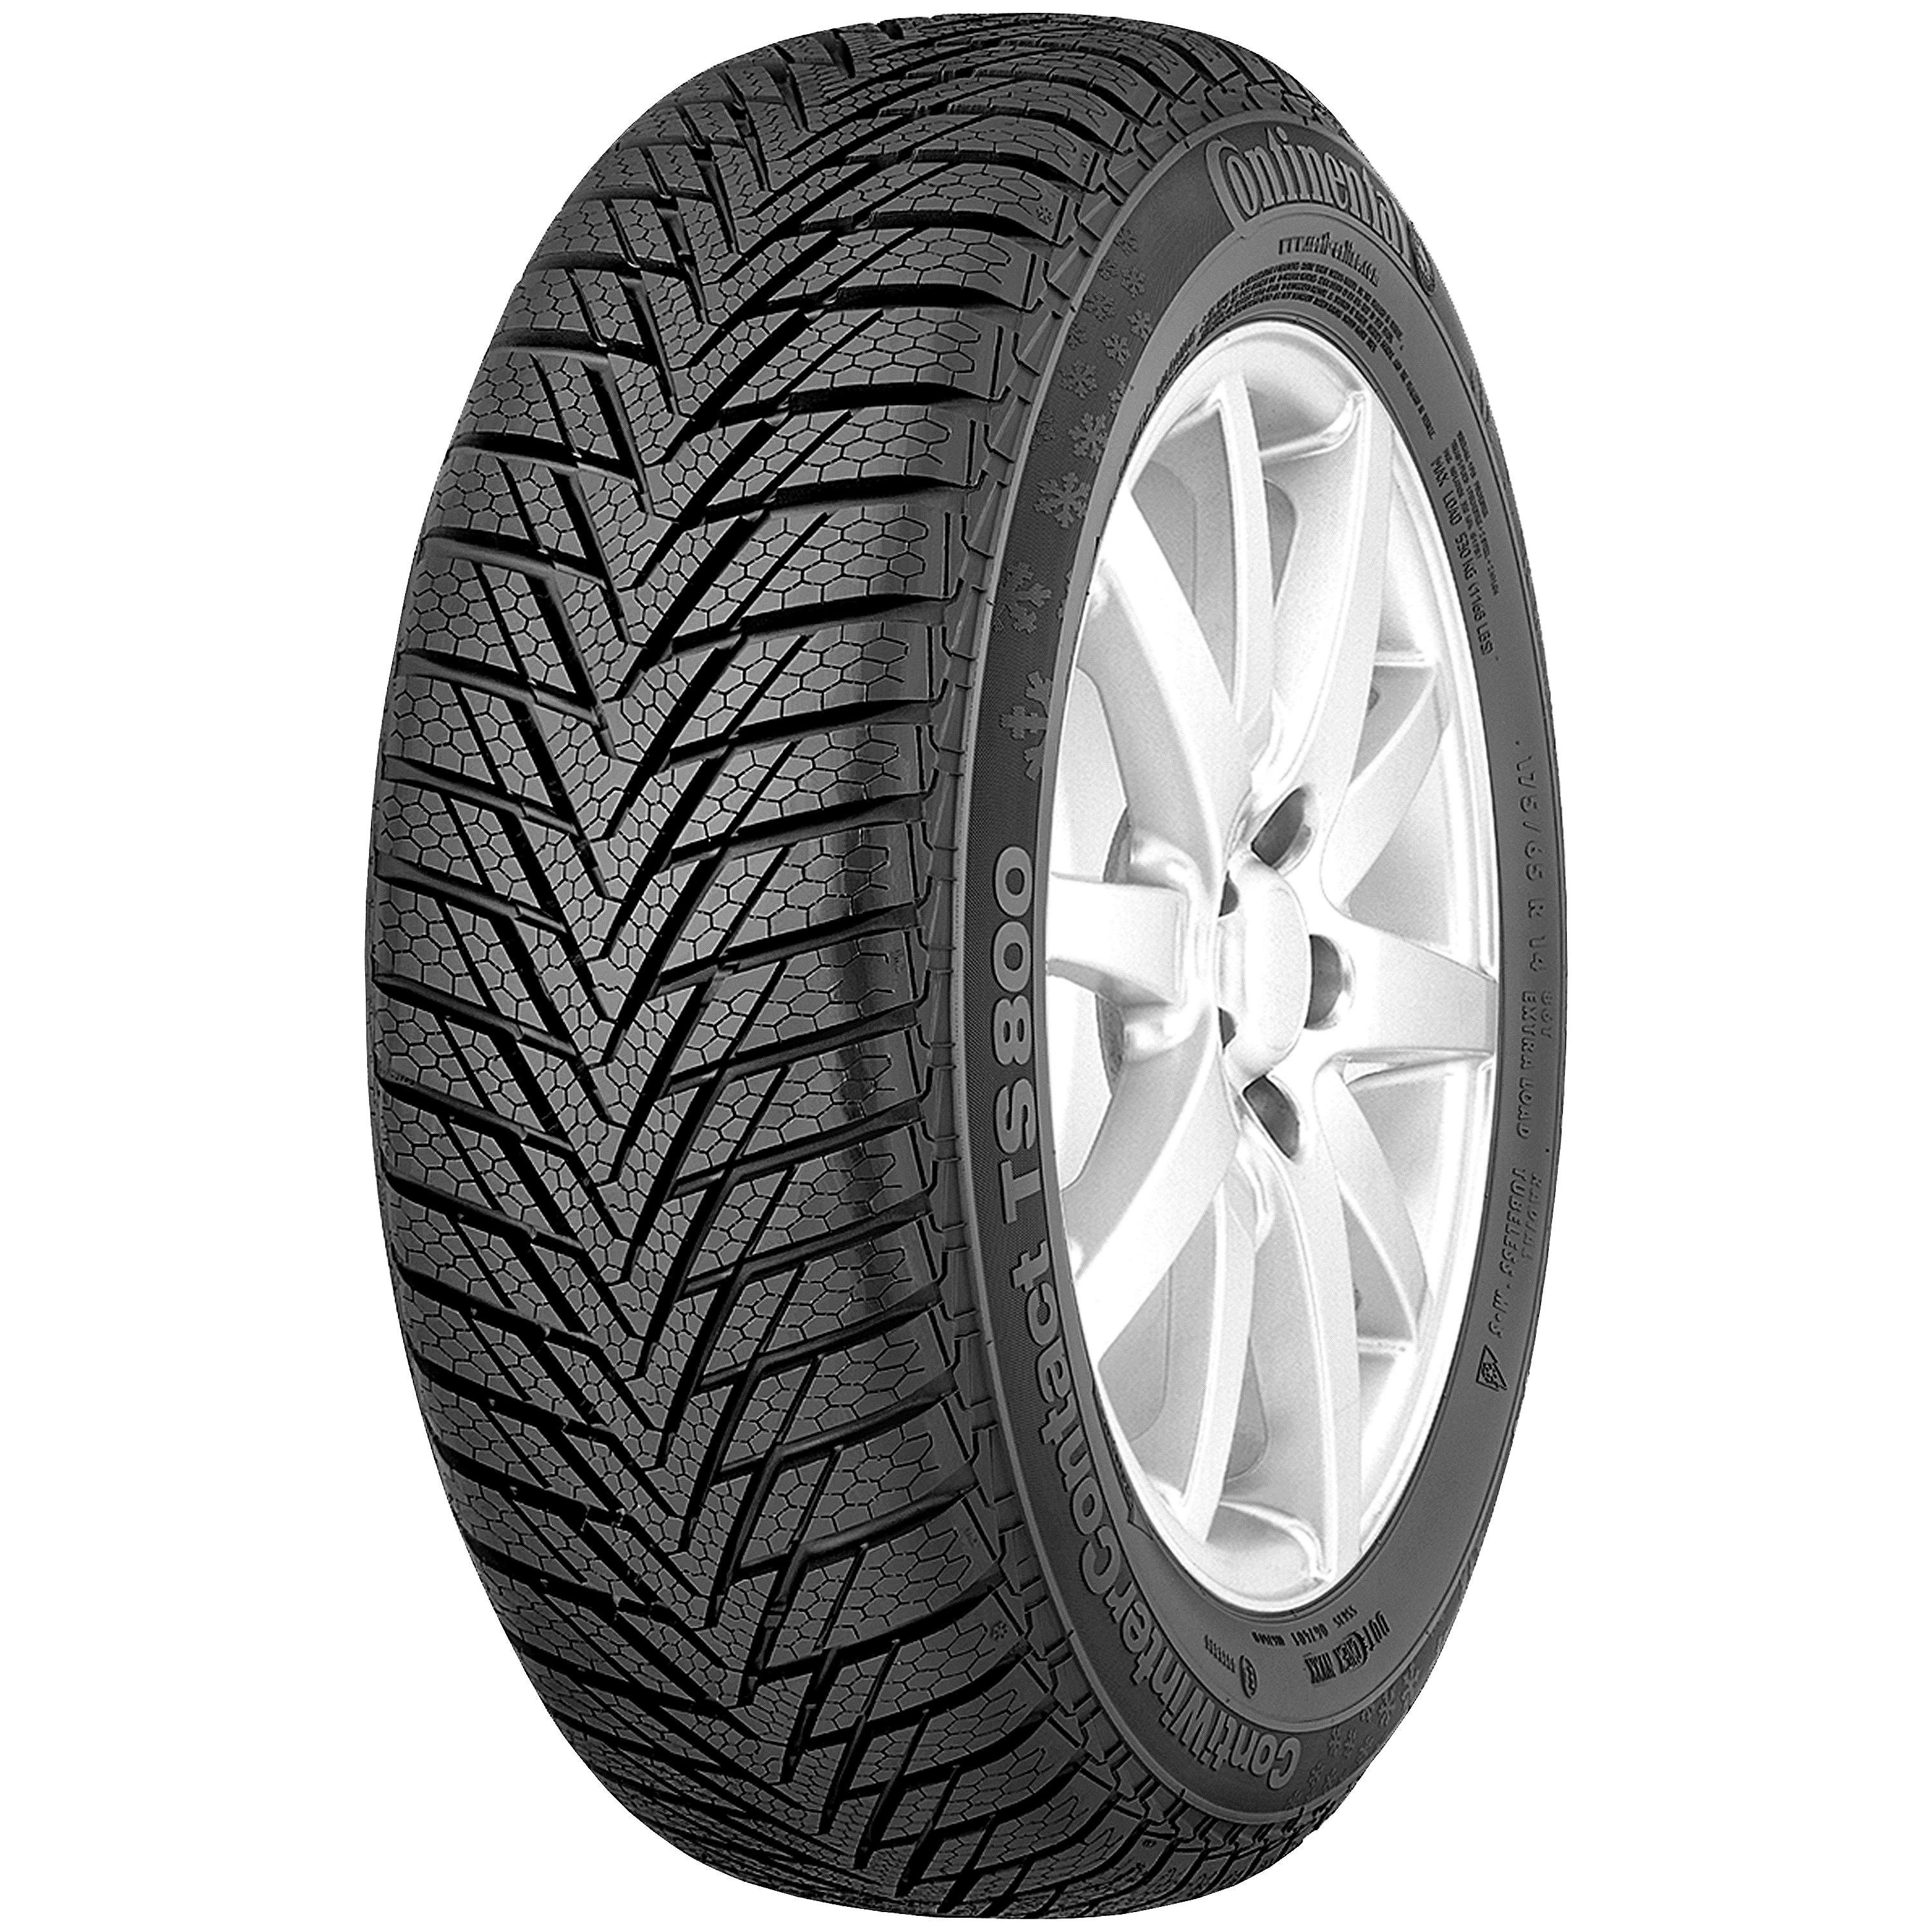 ContiWinterContact TS 800: for compact the winter Tailor-made category tire